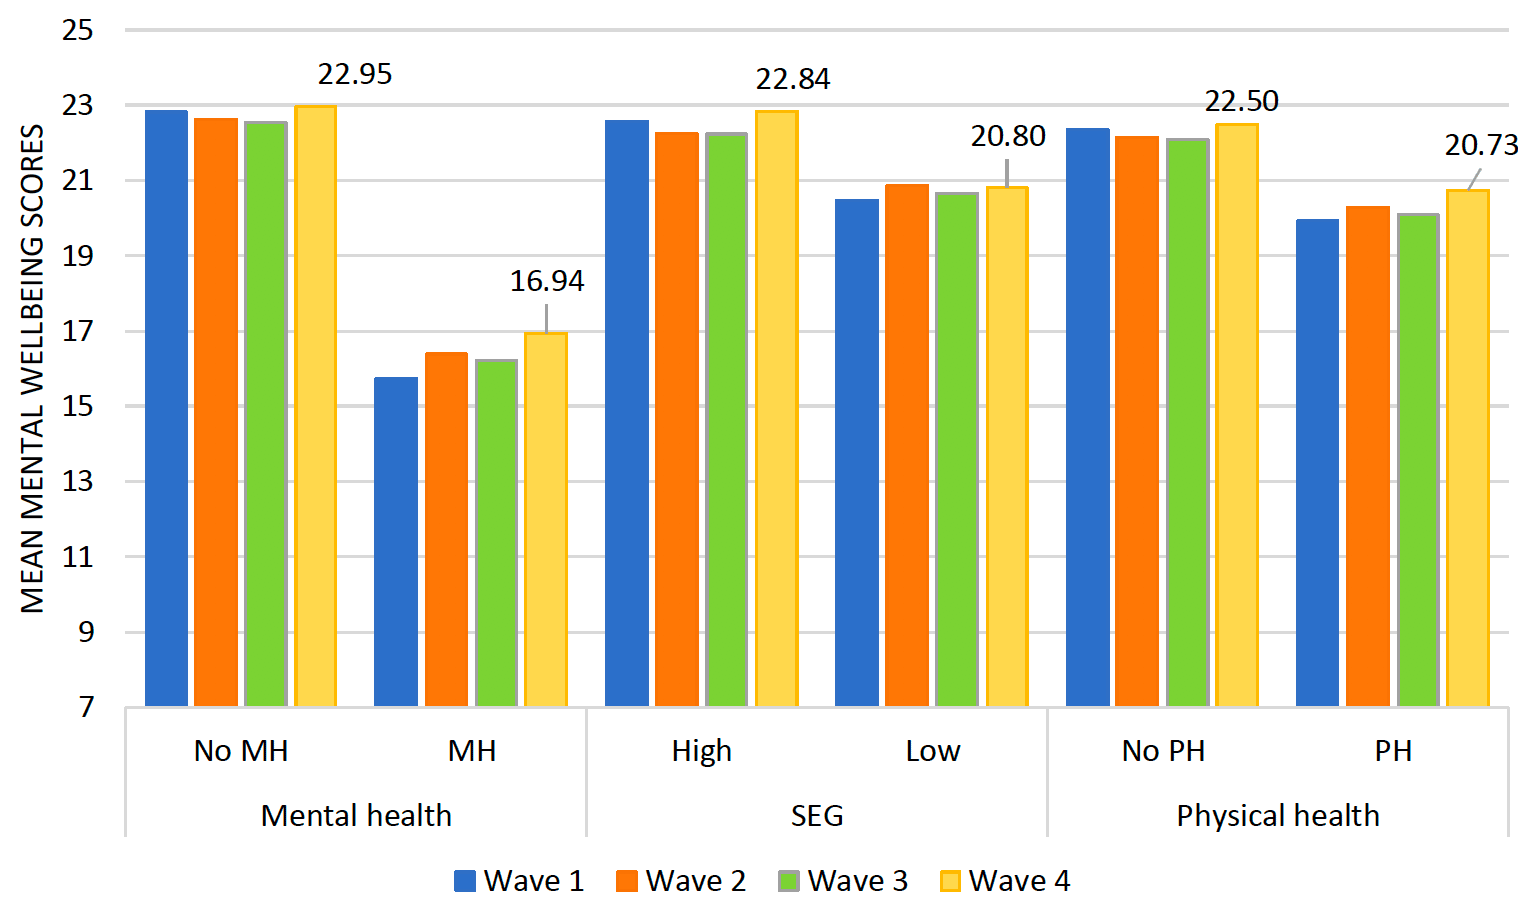 This histogram displays the mean mental wellbeing scores in all four waves. The findings are presented separately for those who did or did not report a pre-existing mental health conditions, participants of the high or low socio-economic group and those who reported or did not report a pre-existing physical health condition. The highest mean mental wellbeing scores were found for participants without a pre-existing mental health condition, which showed mean values of 22.81 at Wave 1, 22.62 at Wave 2, 22.53 at Wave 3 and 22.95 at Wave 4. Participants from a high socio-economic group had mean mental wellbeing scores of 22.58 at Wave 1, 22.25 at Wave 2, 22.22 at Wave 3 and 22.84 at Wave 4. A mean mental wellbeing score of 22.34 was found for participants without a pre-existing physical condition at Wave 1, 22.16 at Wave 2, 22.08 at Wave 3 and 22.50 at Wave 4. Participants with a pre-existing physical health condition had a mean score of 19.94 at Wave 1, 20.28 at Wave 2, 20.10 at Wave 3 and 20.73 at Wave 4. The mean mental wellbeing scores of the low socio-economic group ranged from 20.47 at Wave 1, over 20.87 at Wave 2 and 20.64 at Wave 3 to 20.80 at Wave 4. Finally, the lowest mean mental wellbeing scores were identified for participants with a pre-existing mental health condition. At Wave 1, the mean score was identified as 15.74, at Wave 2 it was 16.37, at Wave 3 16.21 and at Wave 4 16.94.